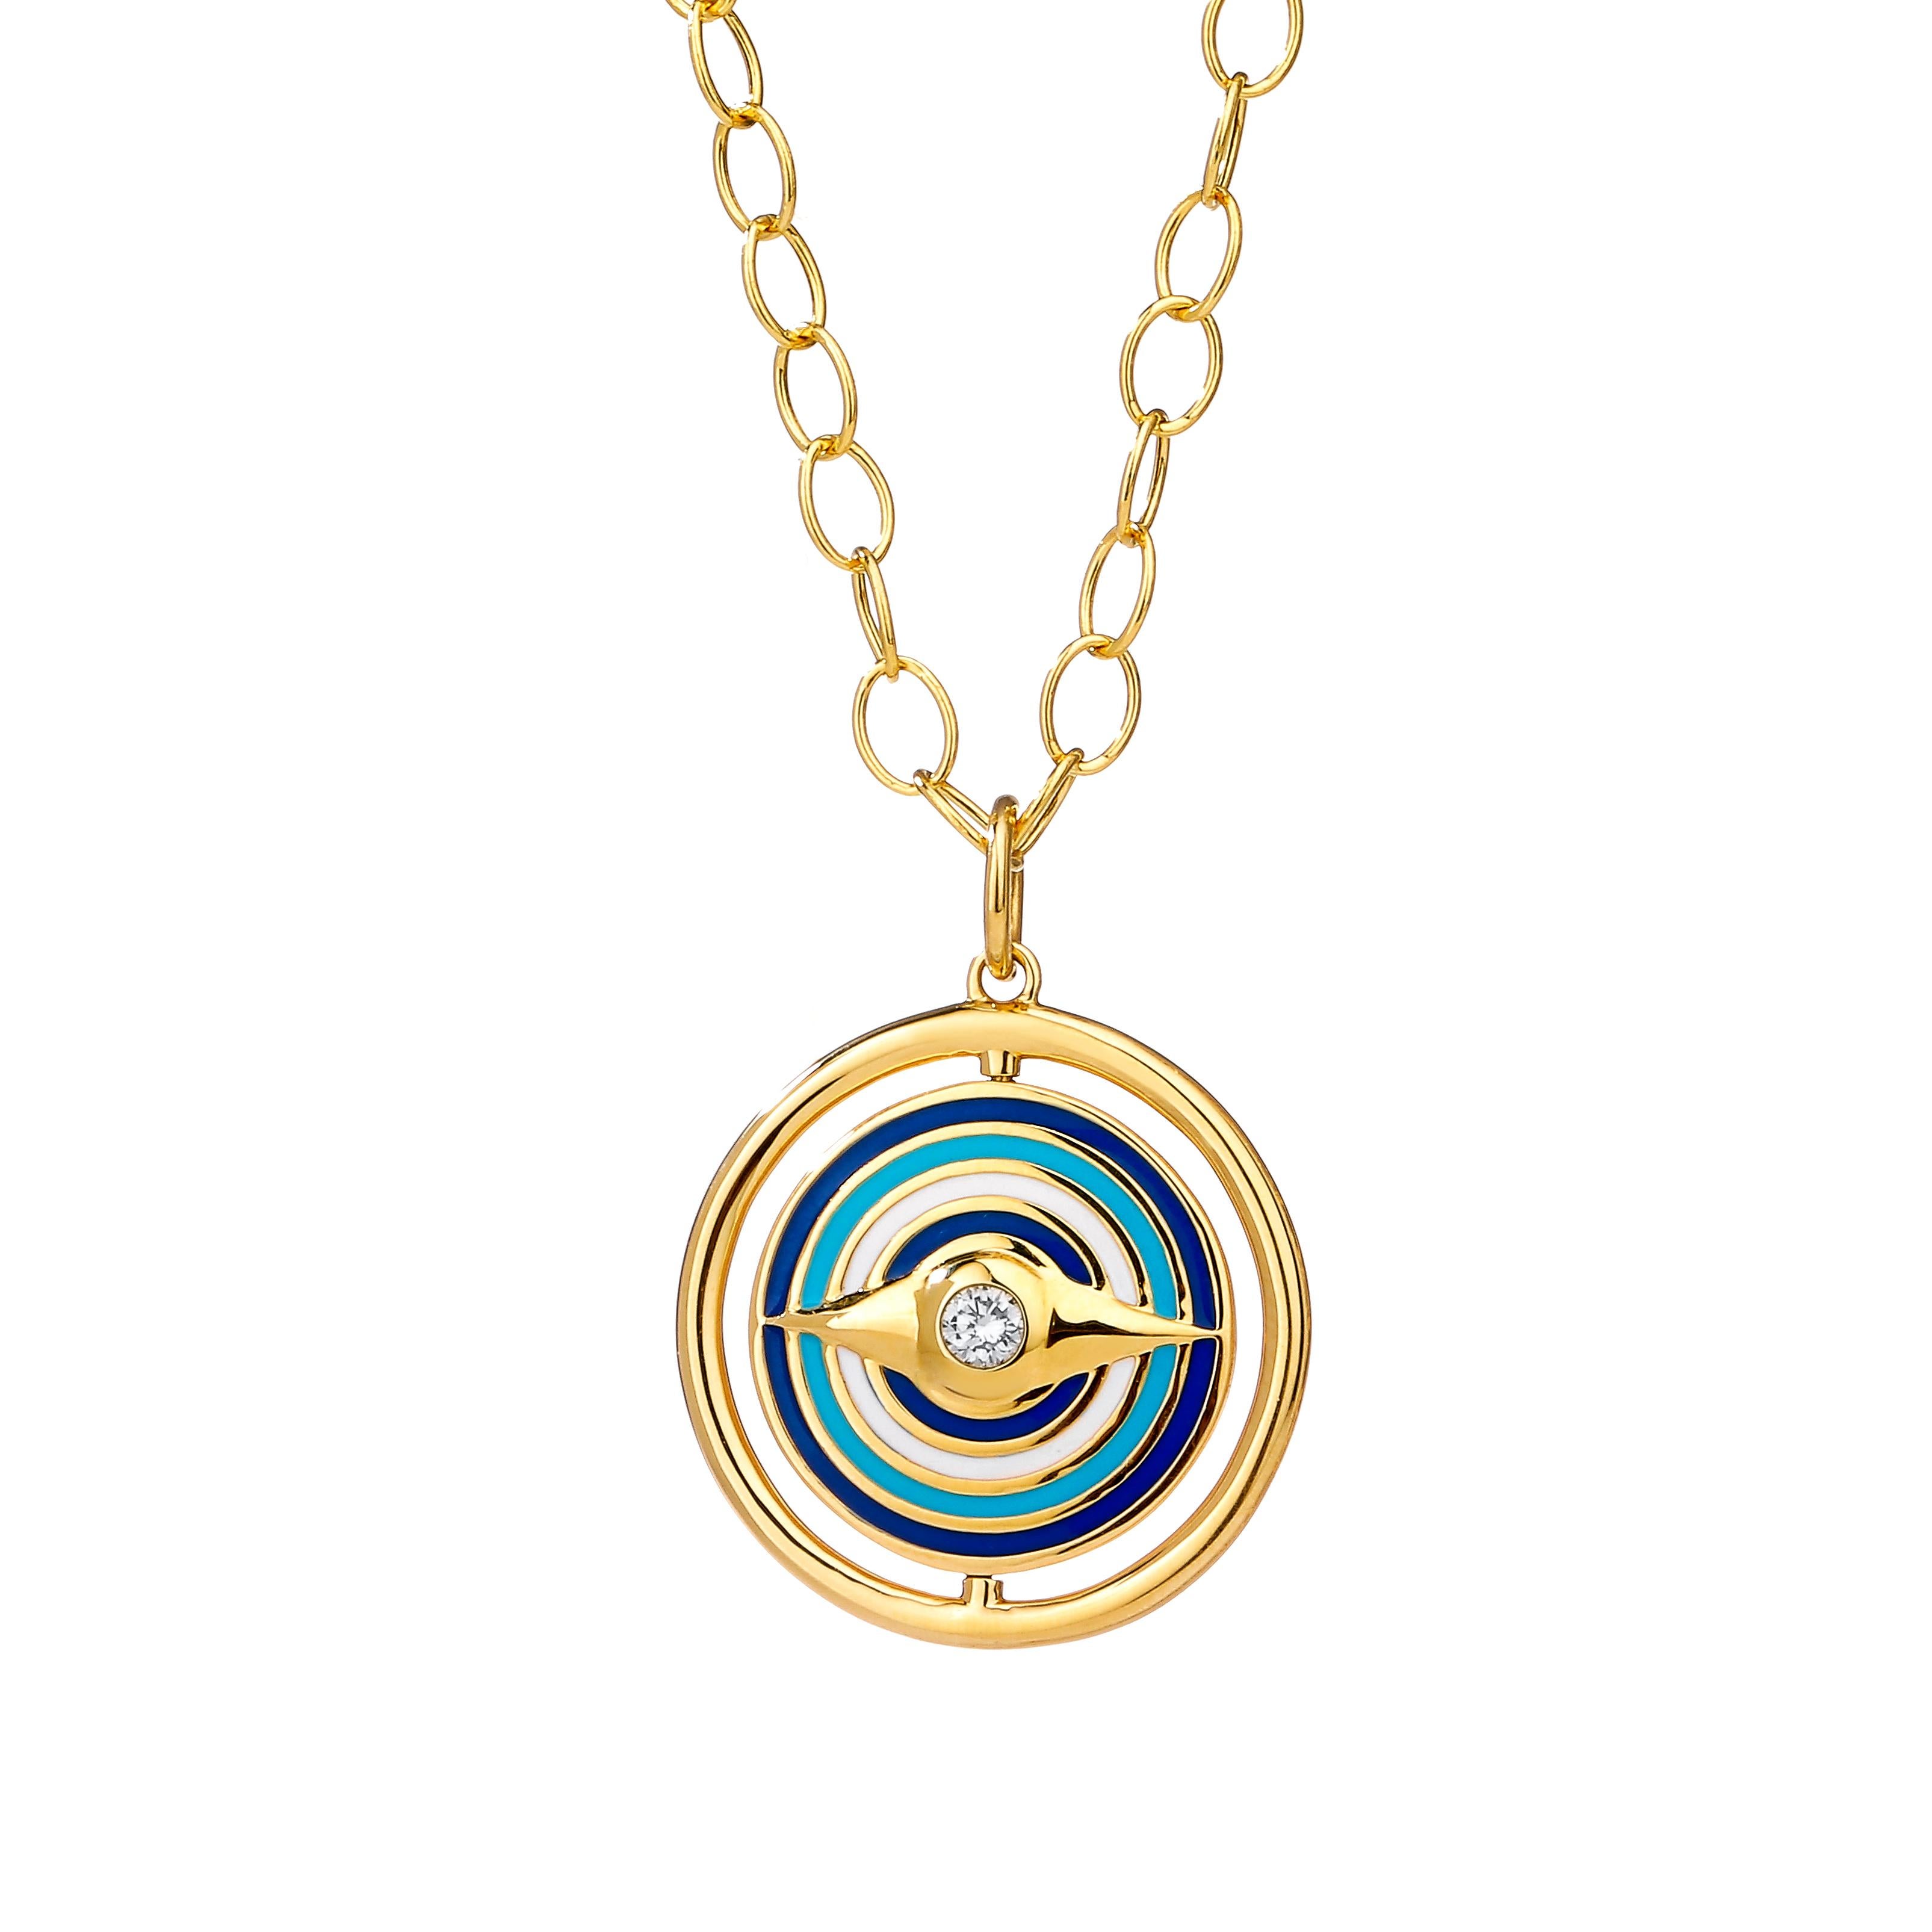 Created in 18kyg
Reversible evil eye pendant
Azure blue, turquoise blue & white enamel
Diamonds 0.60 cts approx
Swivel mechanism to turn the evil eye versions
Limited edition
Chain sold separately 

Constructed from 18 karat yellow gold, this